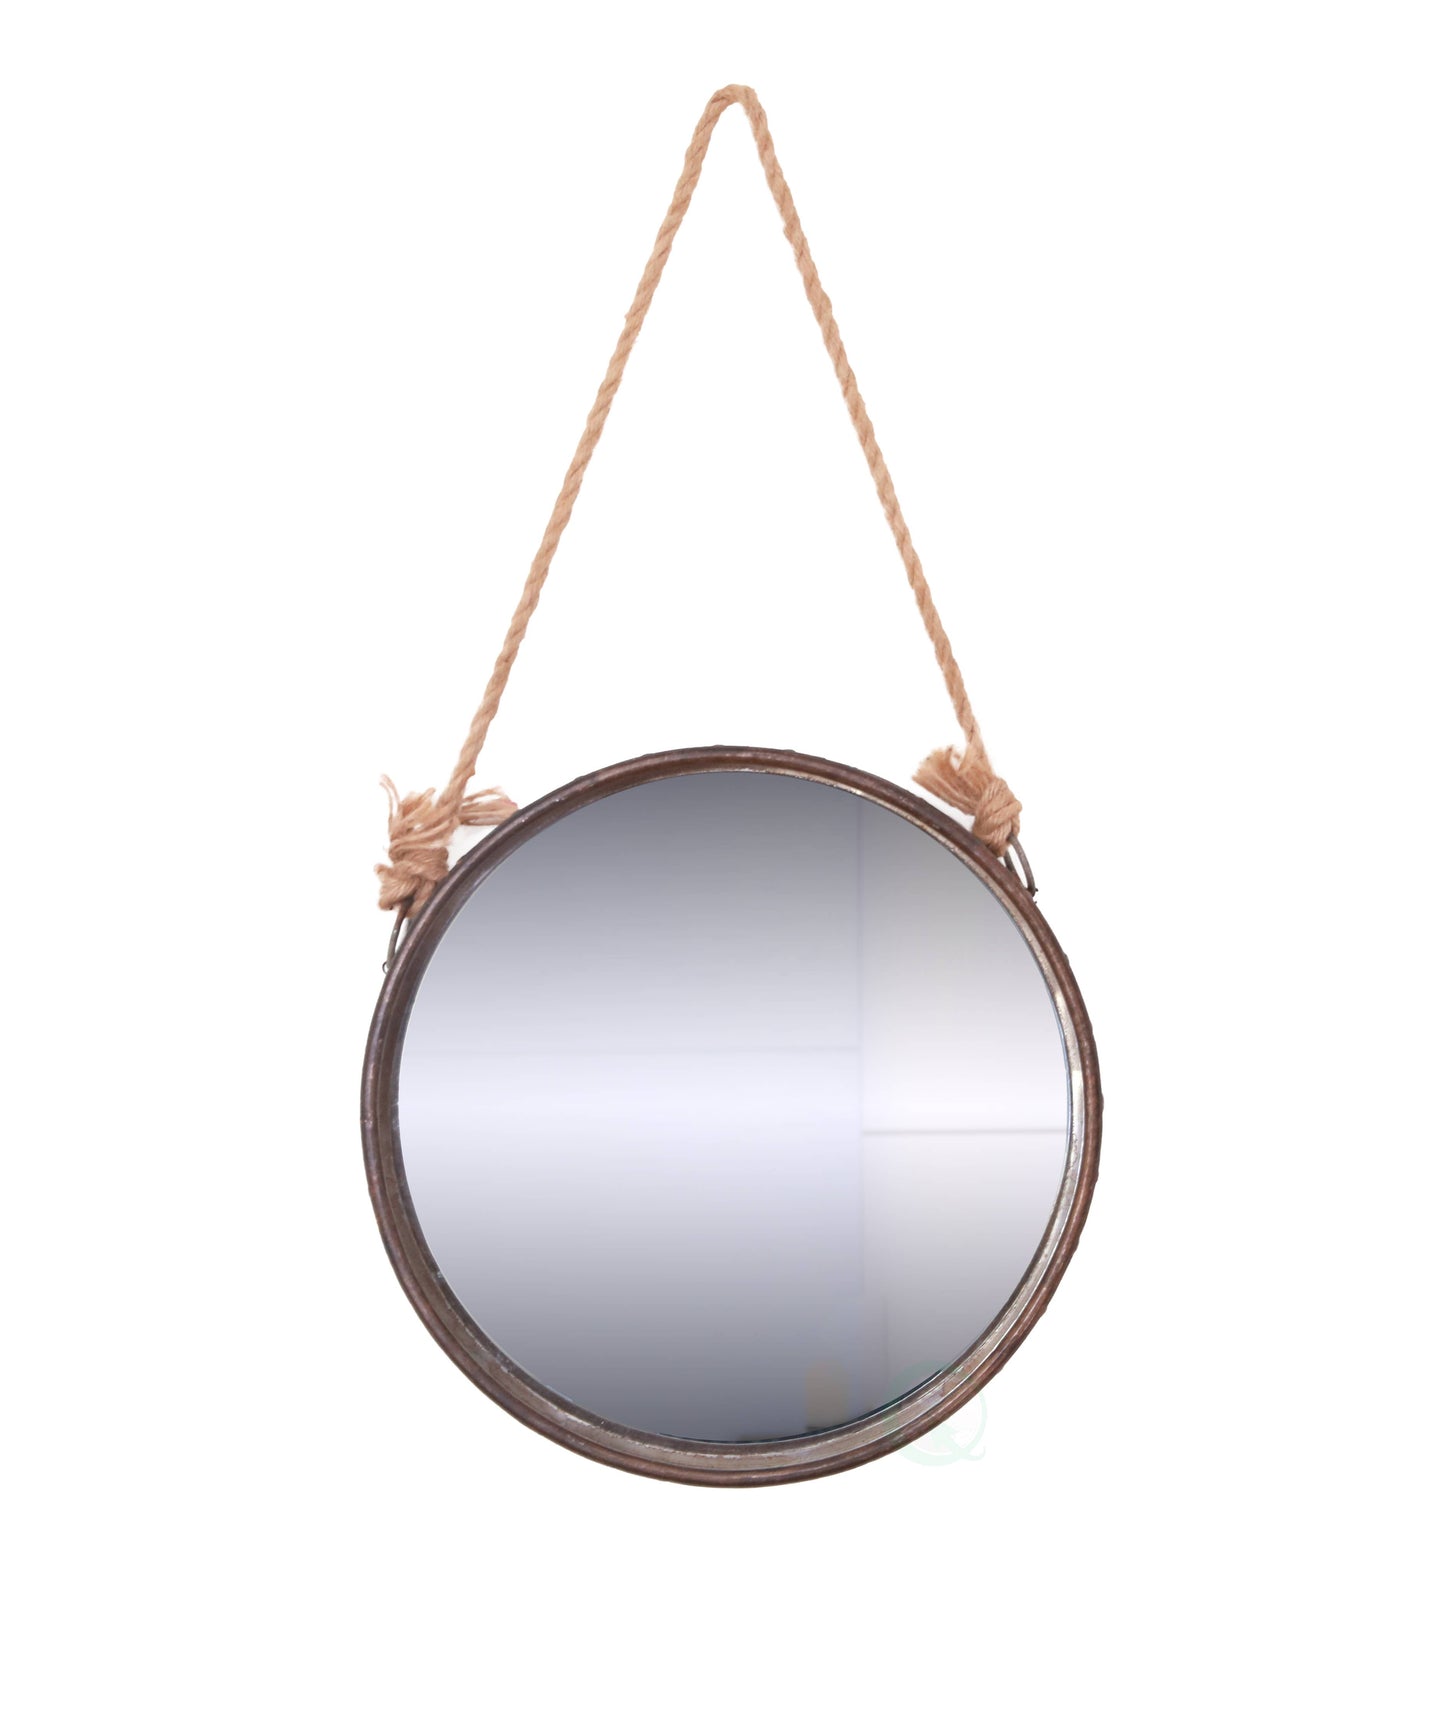 Galvanized Metal Framed Round Wall Mirror With Rope